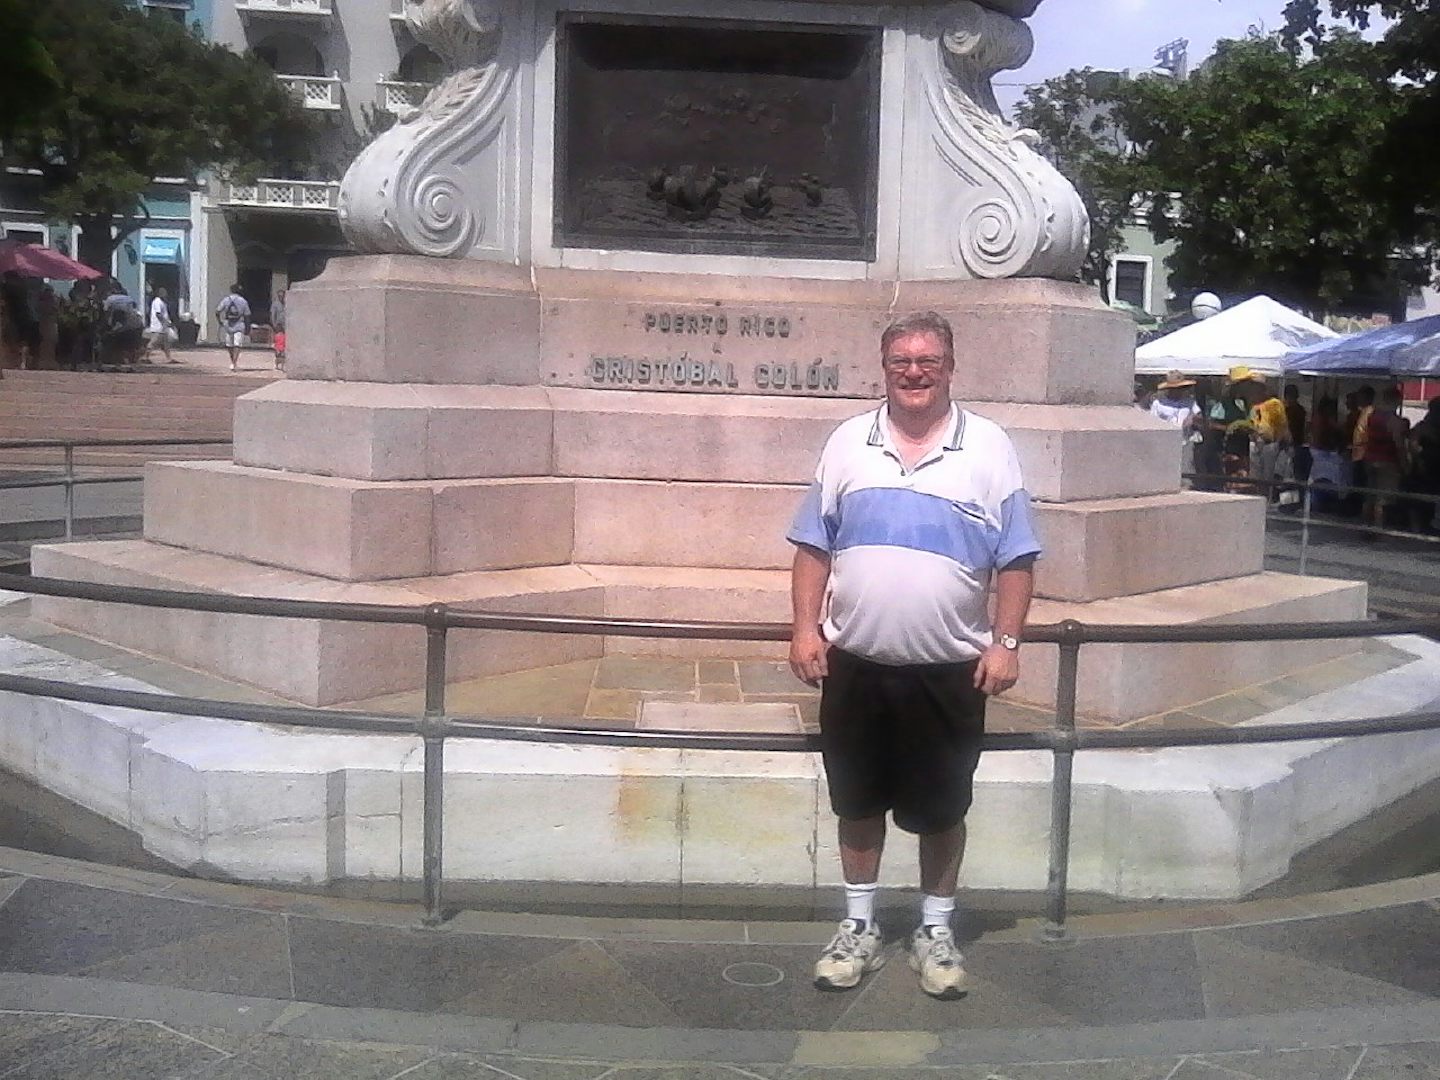 posing in front of the statue and fountain we posed in front of many years